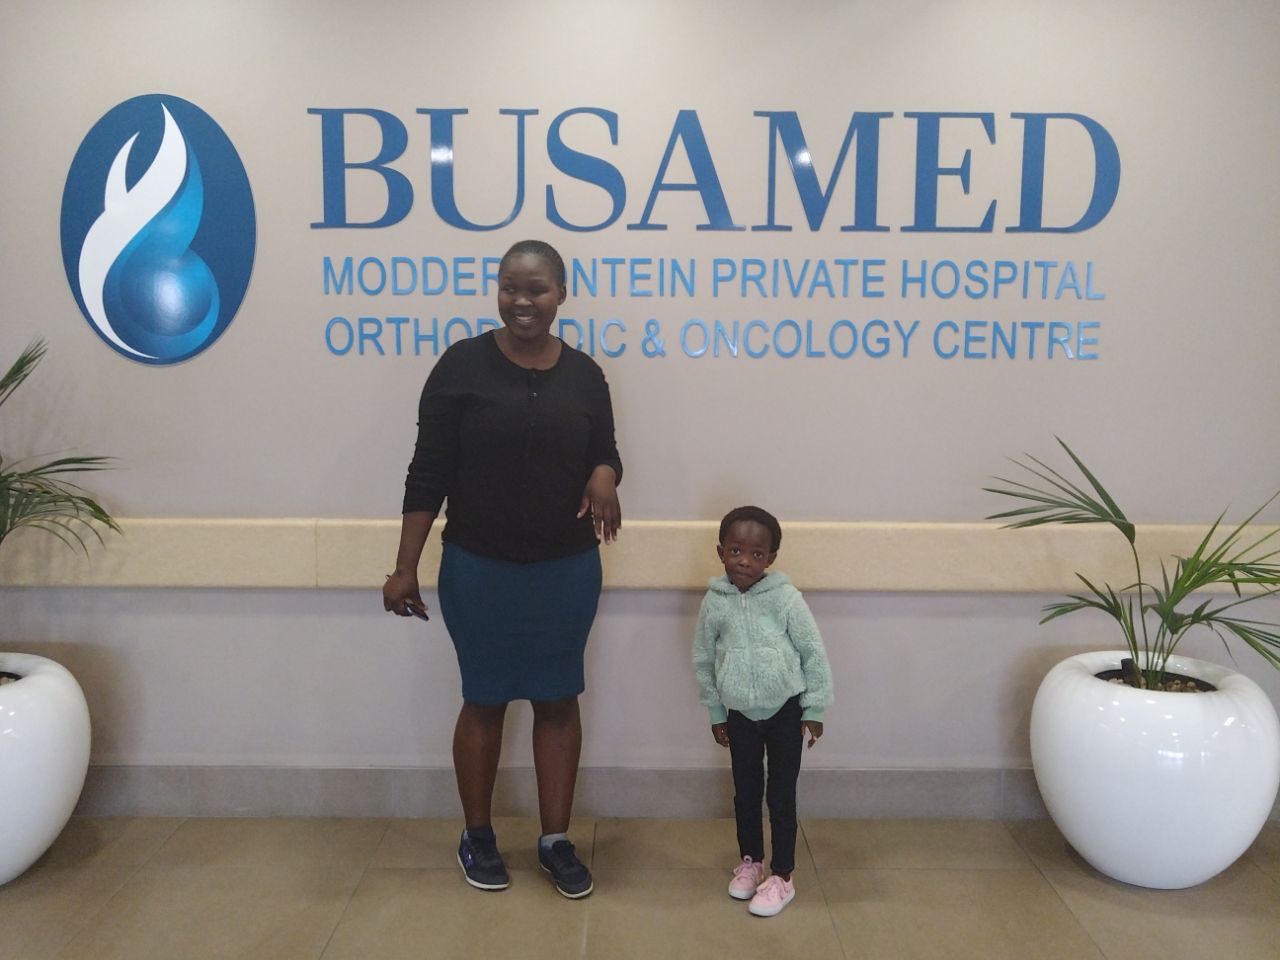 Busamed Modderfontein and Pelo Foundation Gives gift of Life - featured image